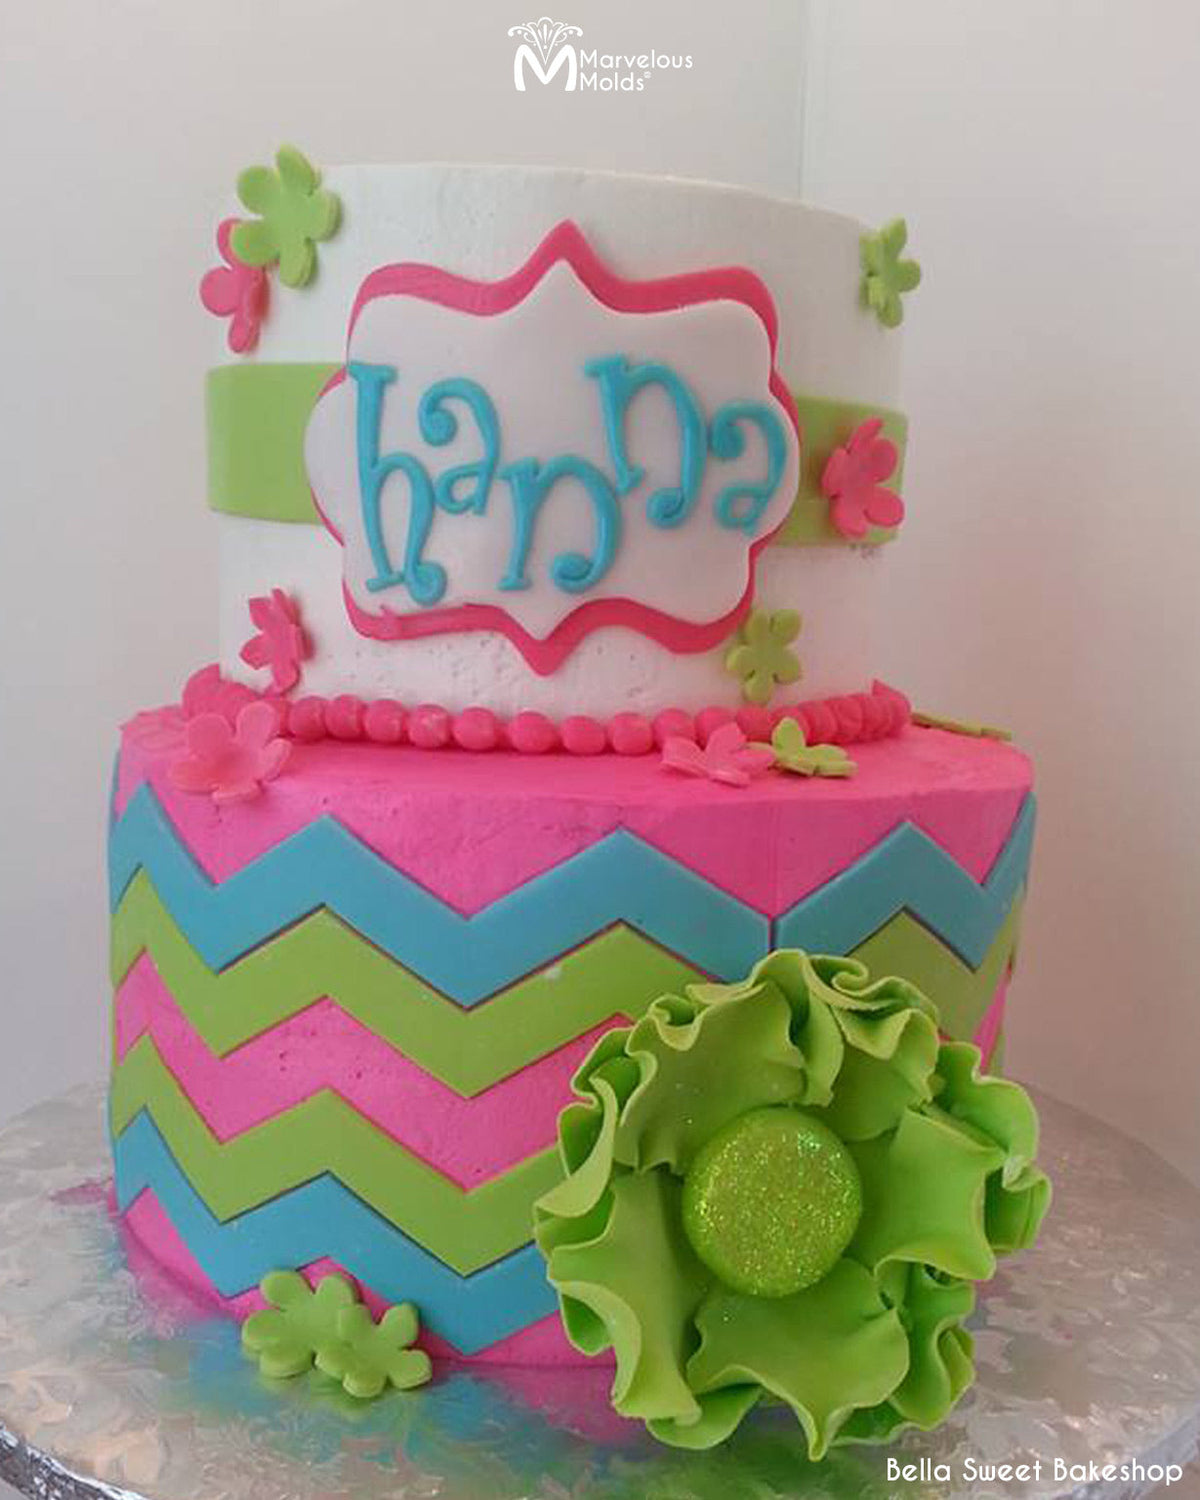 Girly Pink Chevron Birthday Cake Decorated with Marvelous Molds Large Chevron Silicone Onlay Ribbon